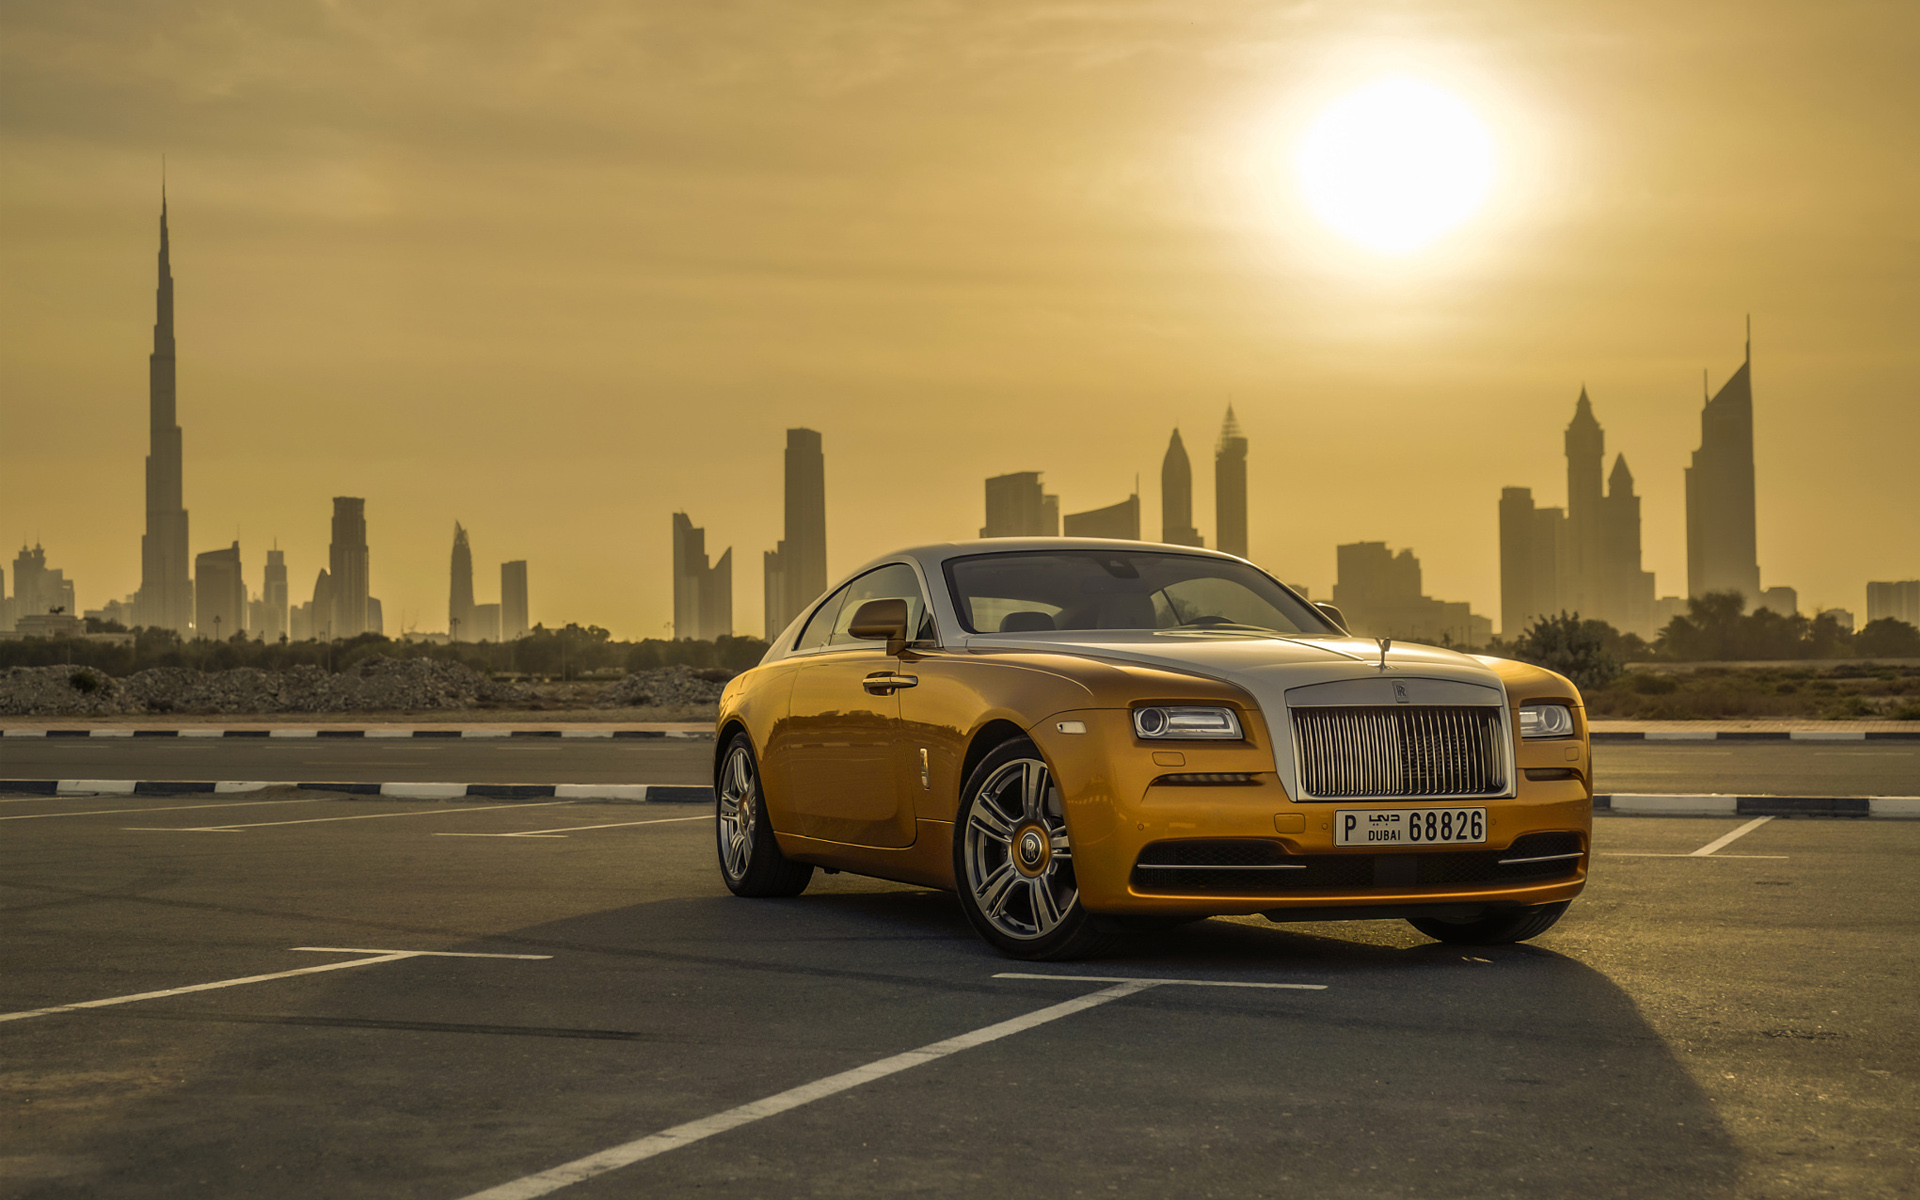 Free download Rolls Royce Wallpapers PC VGMZ3L3 4USkY [1920x1200] for